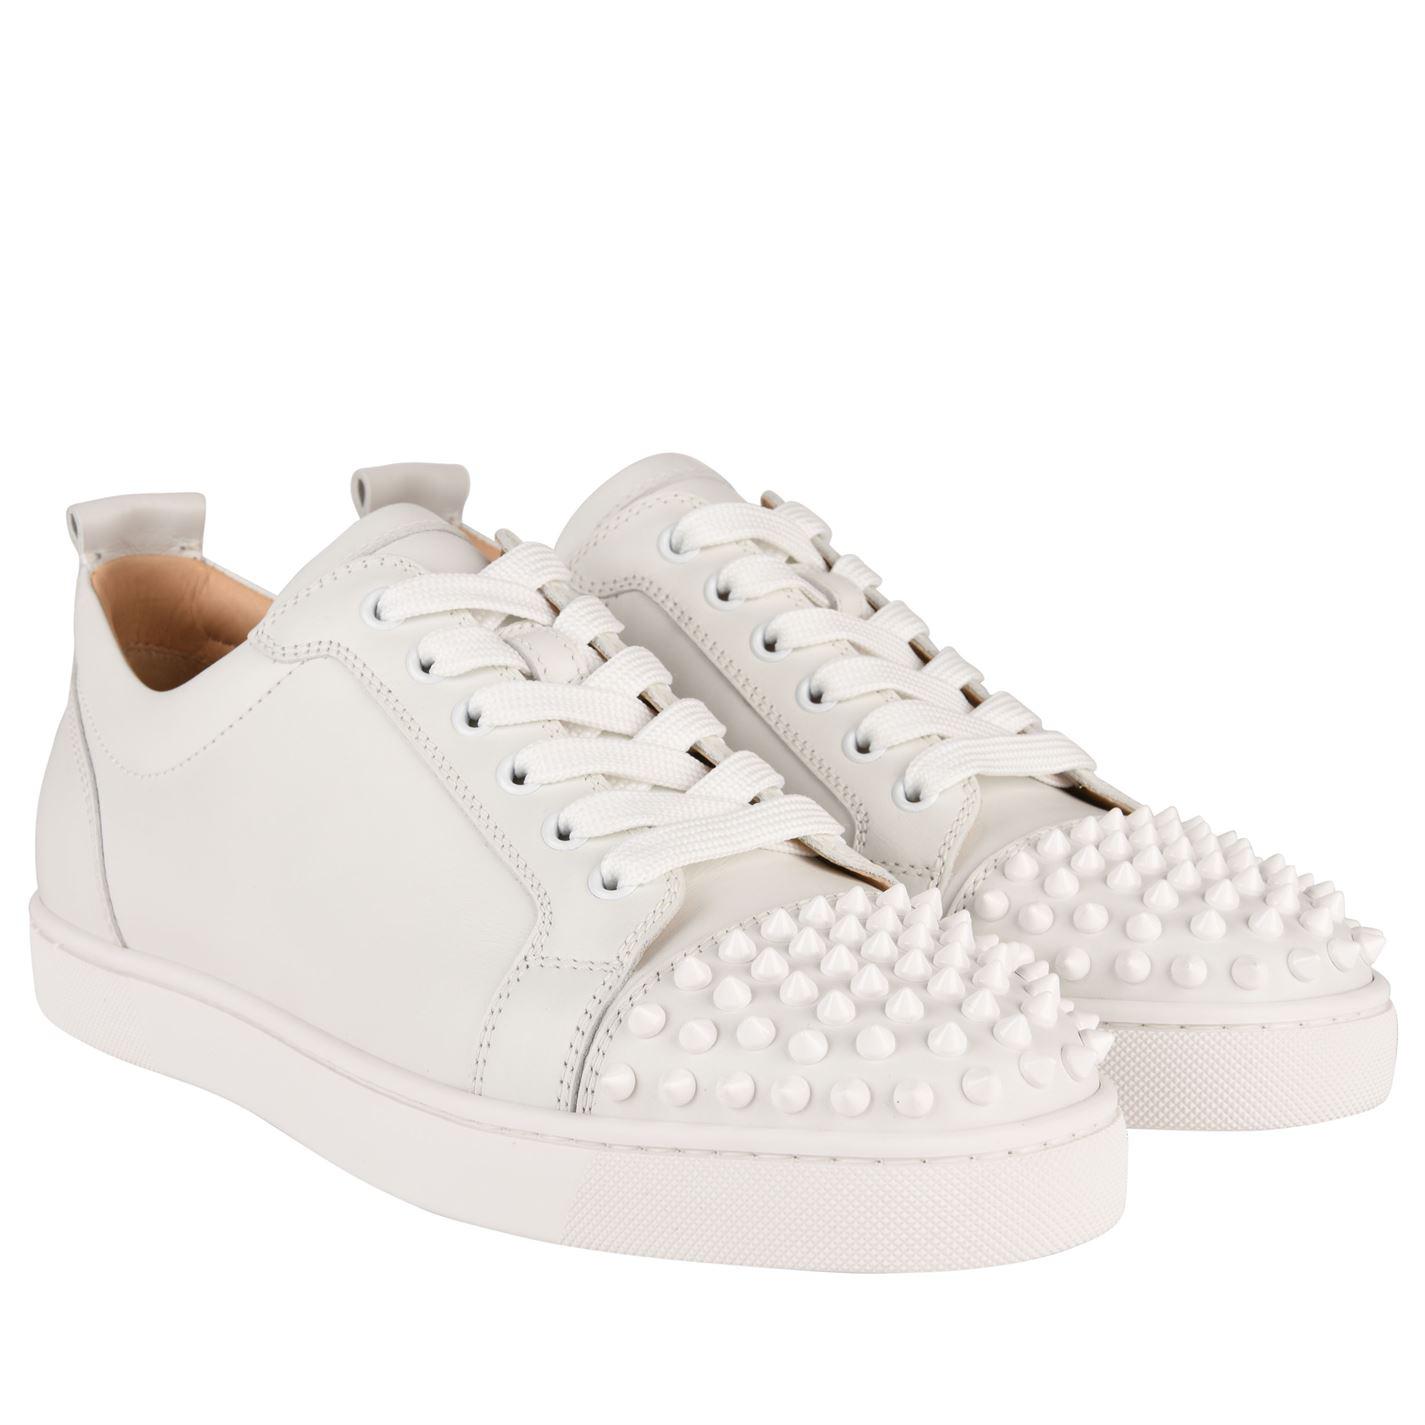 Christian Louboutin Leather Louis Spike Low Trainers in White Leather ...